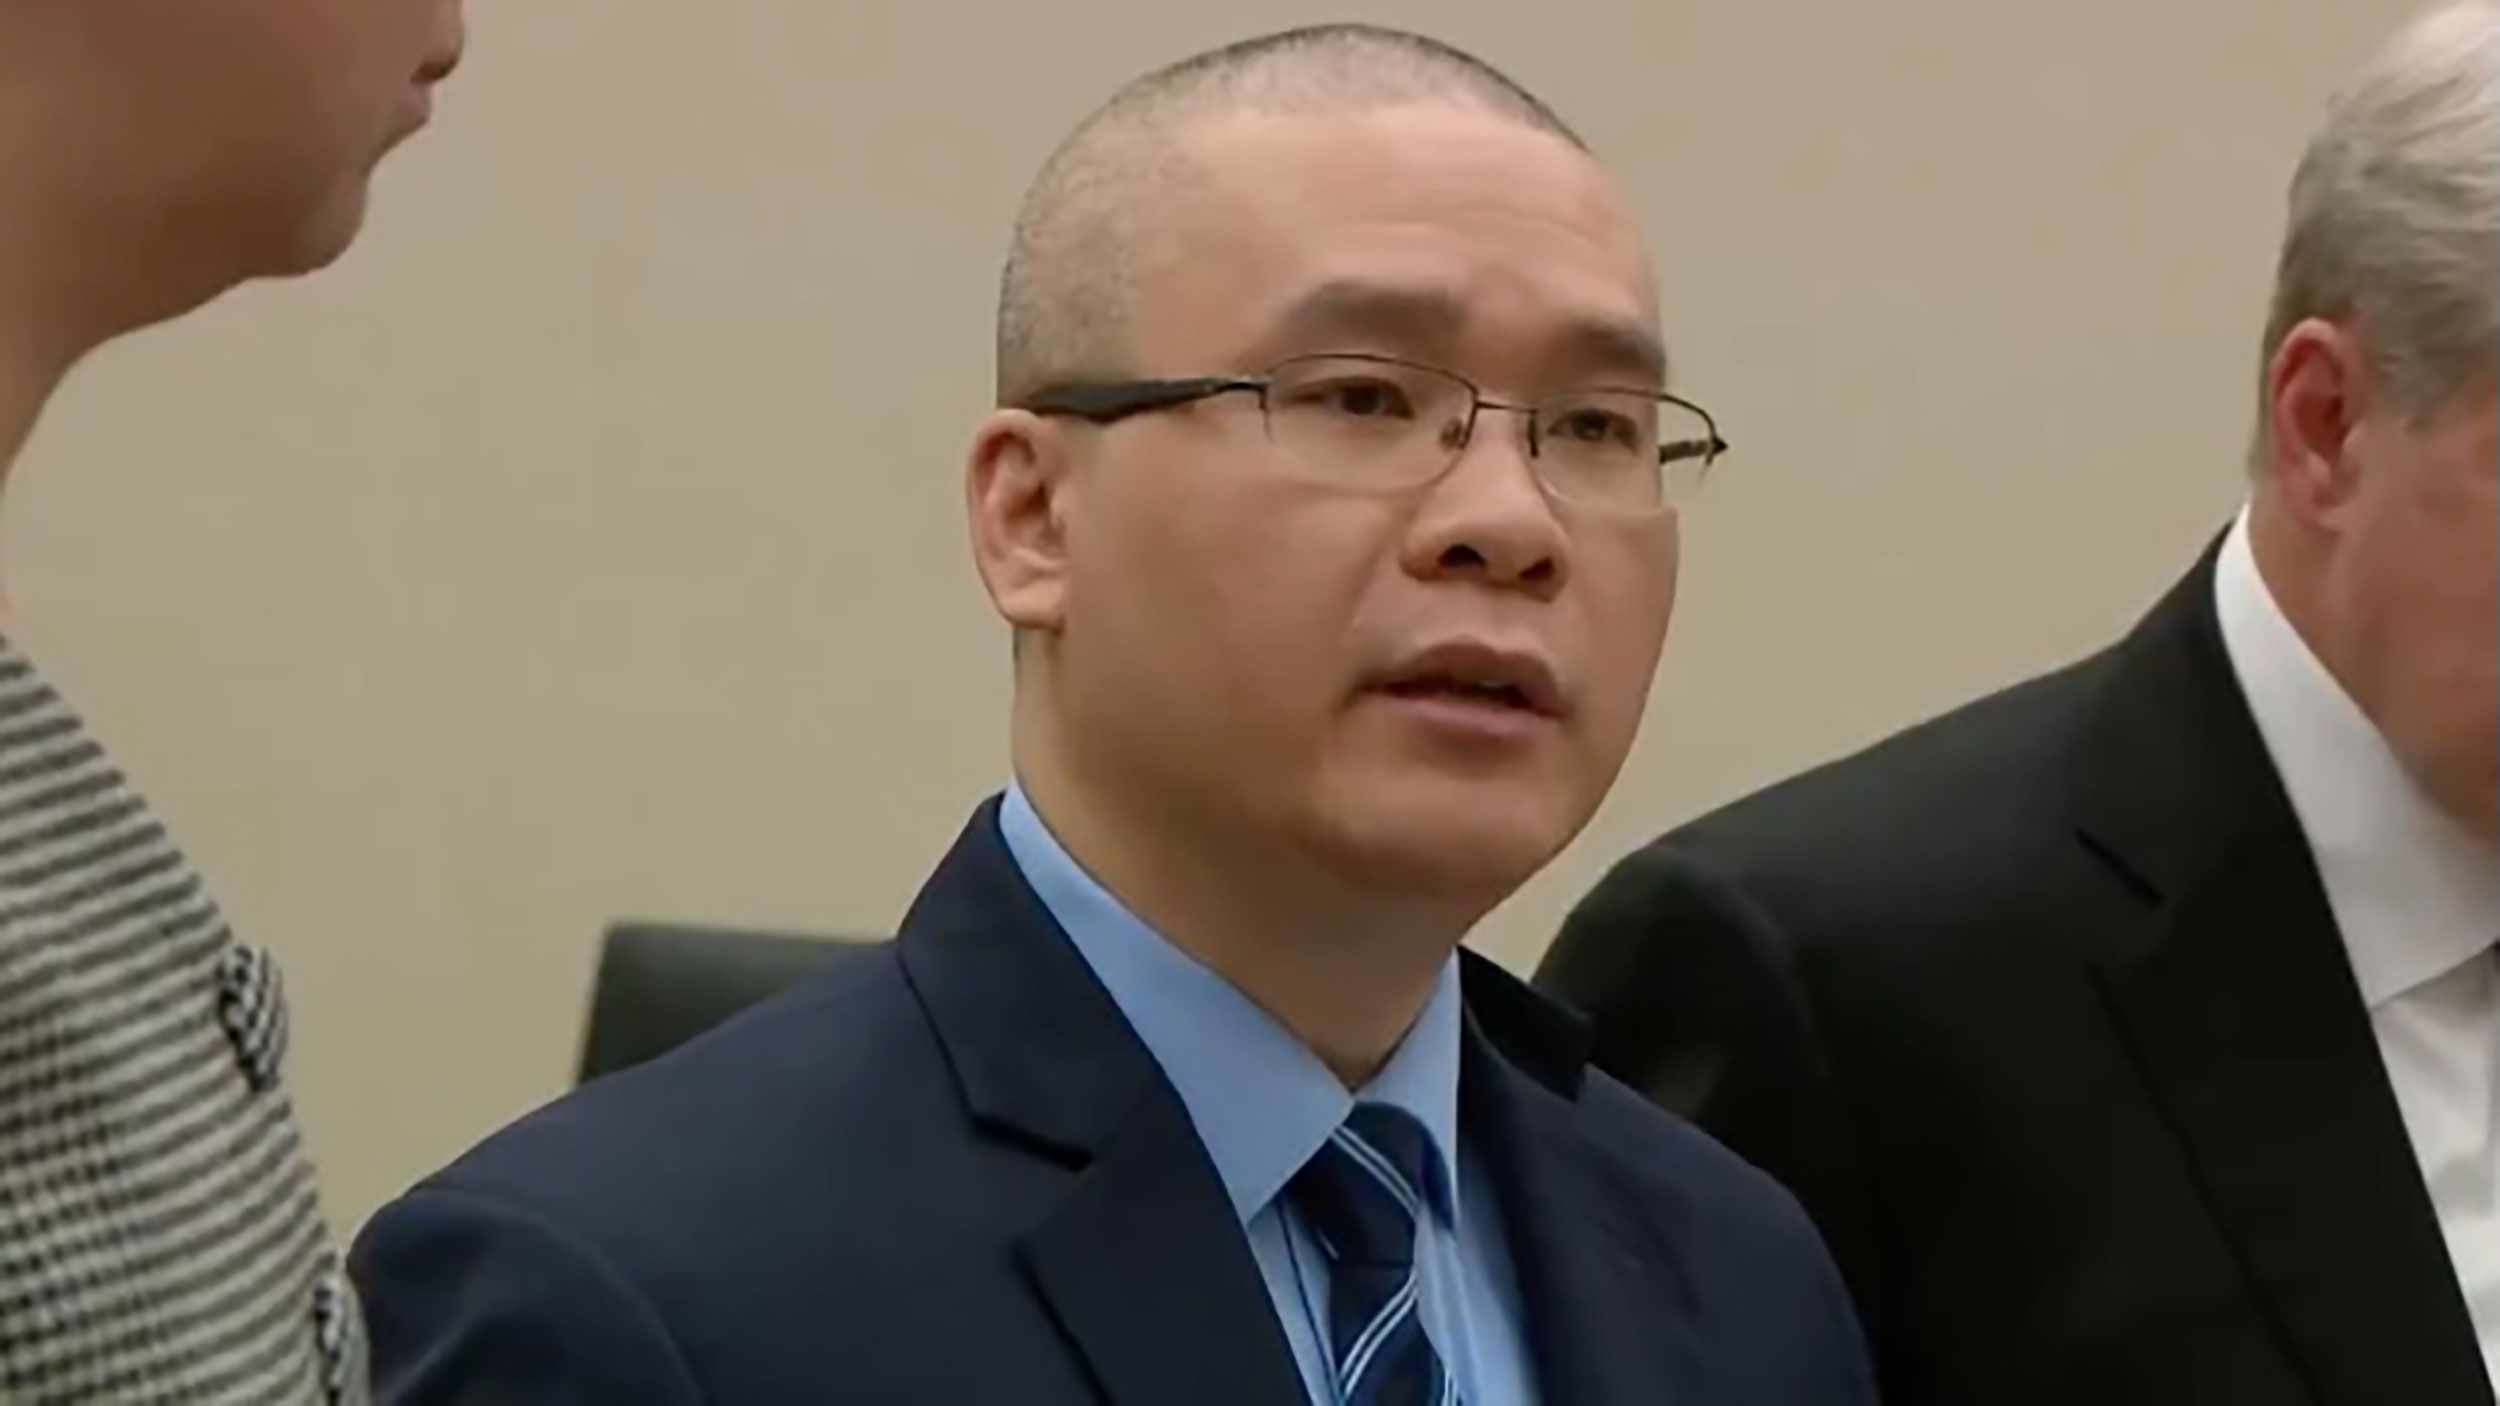 Tou Thao, the last former Minneapolis police officer to face sentencing in state court for his role...